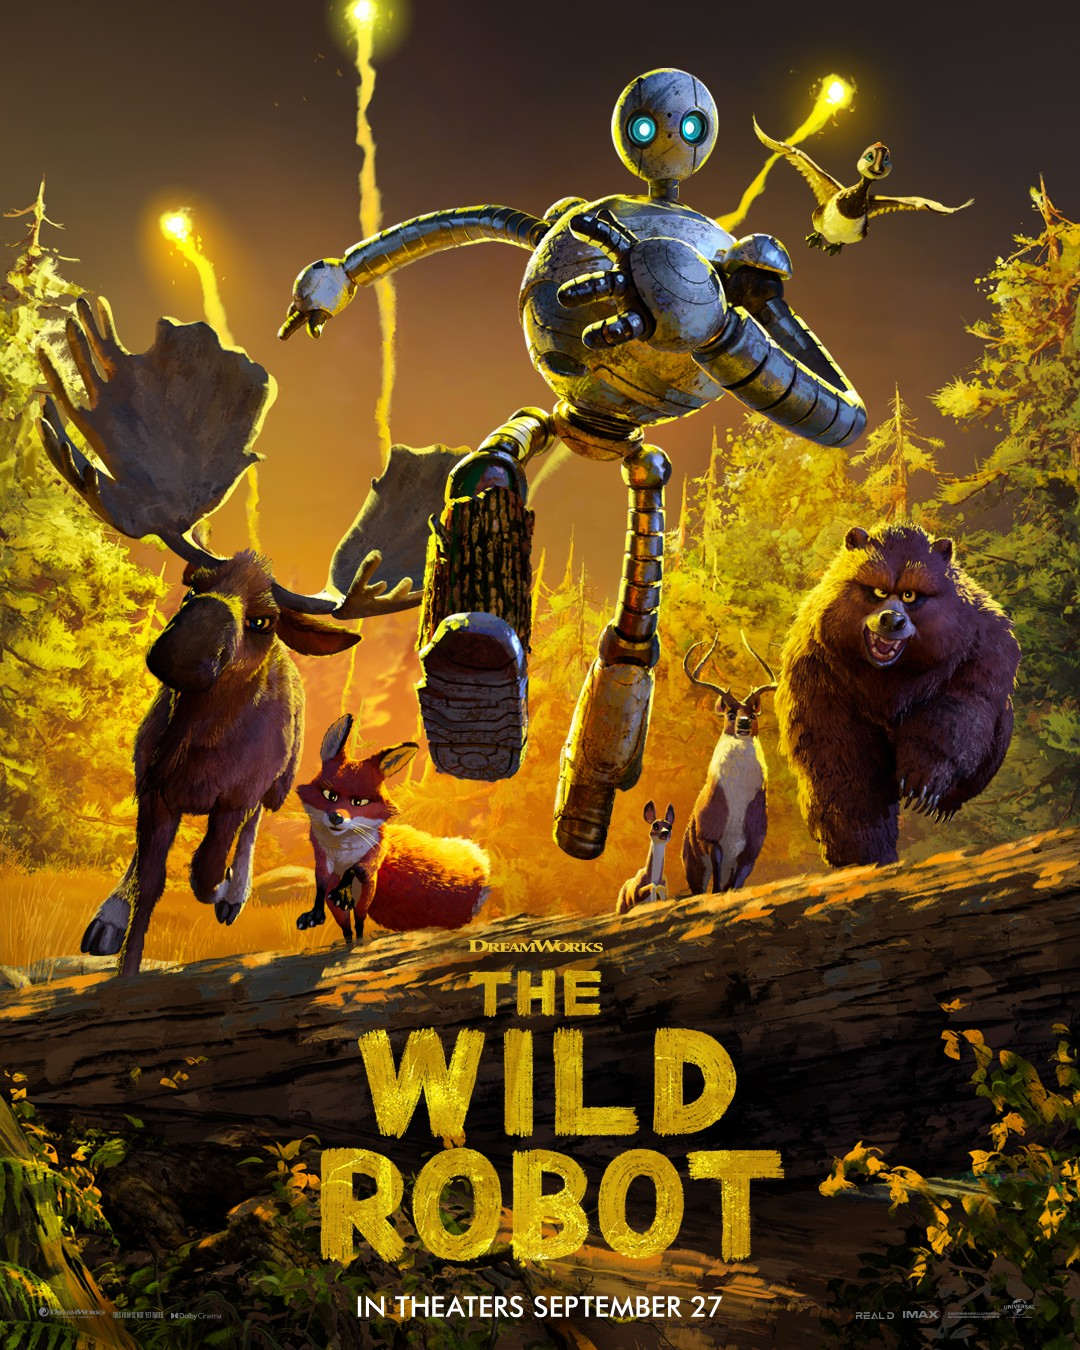 Lupita Nyong’o stars in The Wild Robot from DreamWorks Animation